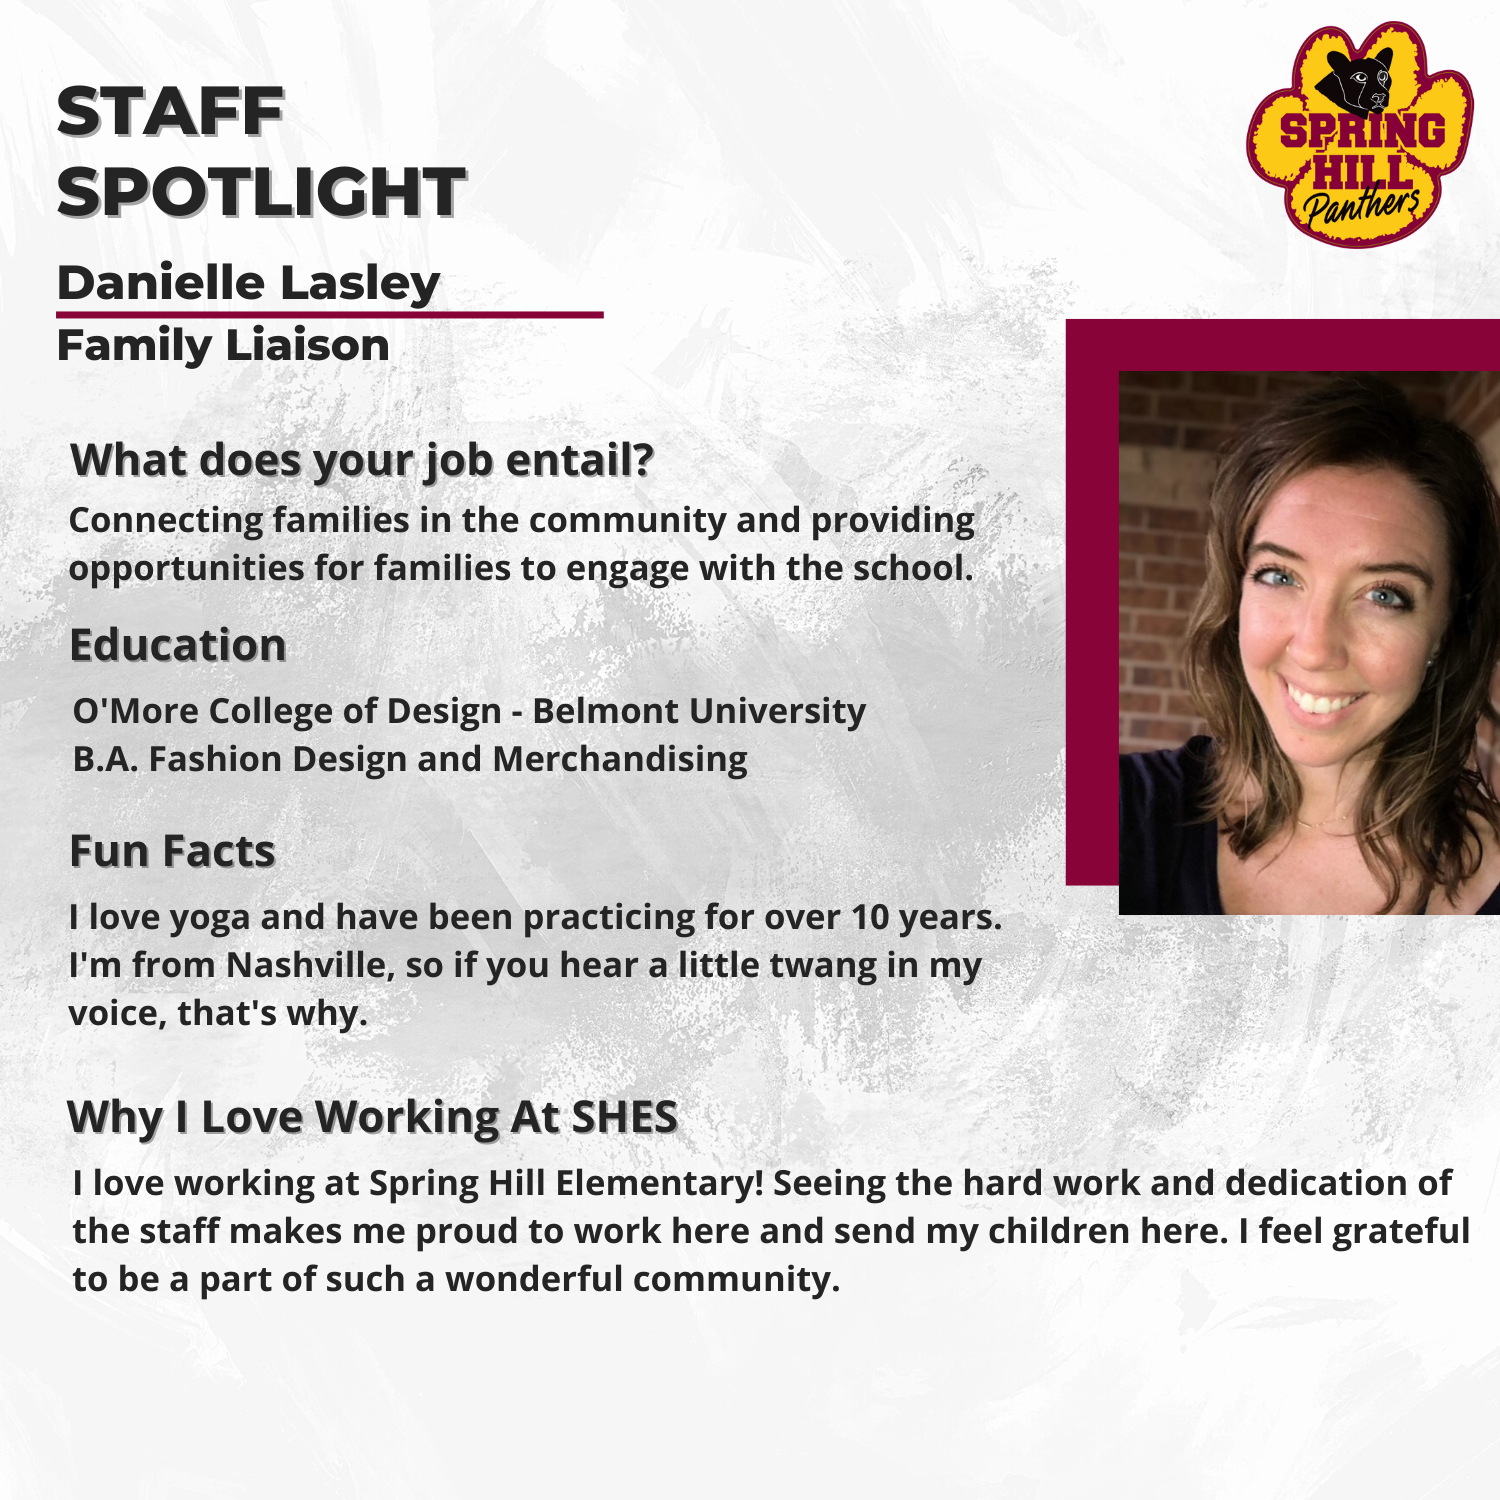 Danielle Lasley; Family Liaison- Connecting families in the community and providing opportunities for families to engage with the school. O'More College of Design- Belmont University- B.A. Fashion Design and Merchandising. I love yoga and have been practicing for over 10 years. I'm from Nashville, so if you hear a little twang in my voice, that's why. I love working at Spring Hill Elementary! Seeing the hard work and dedication of the staff makes me proud to work here and send my children here. I feel grateful to be a part of such a wonderful community. 